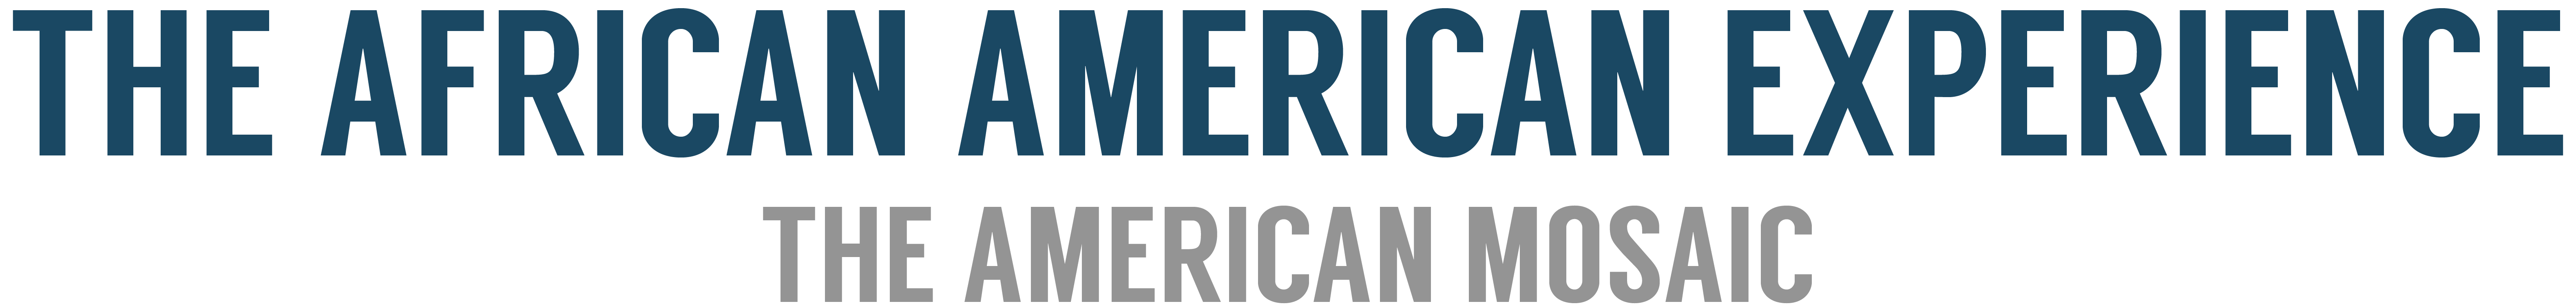 ABC-CLIO Solutions - The American Mosaic: The African American Experience